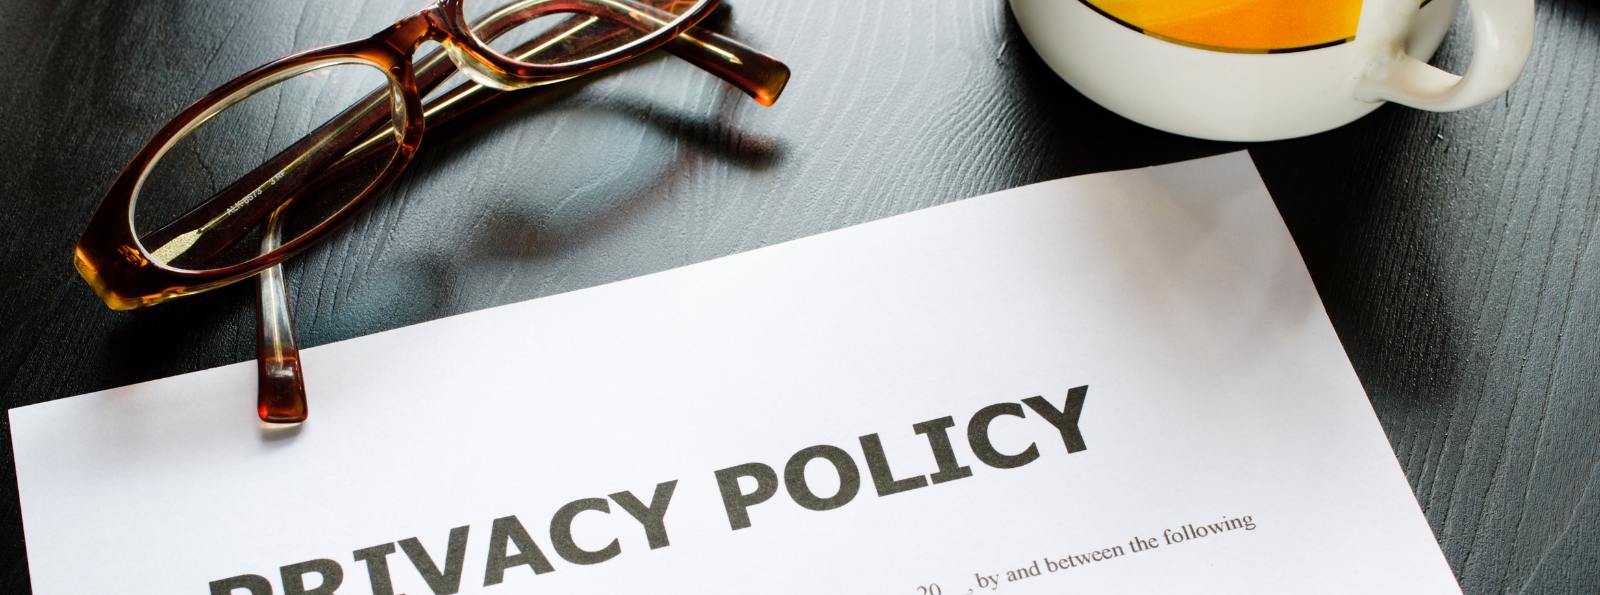 document title "Privacy Policy" laying on a table